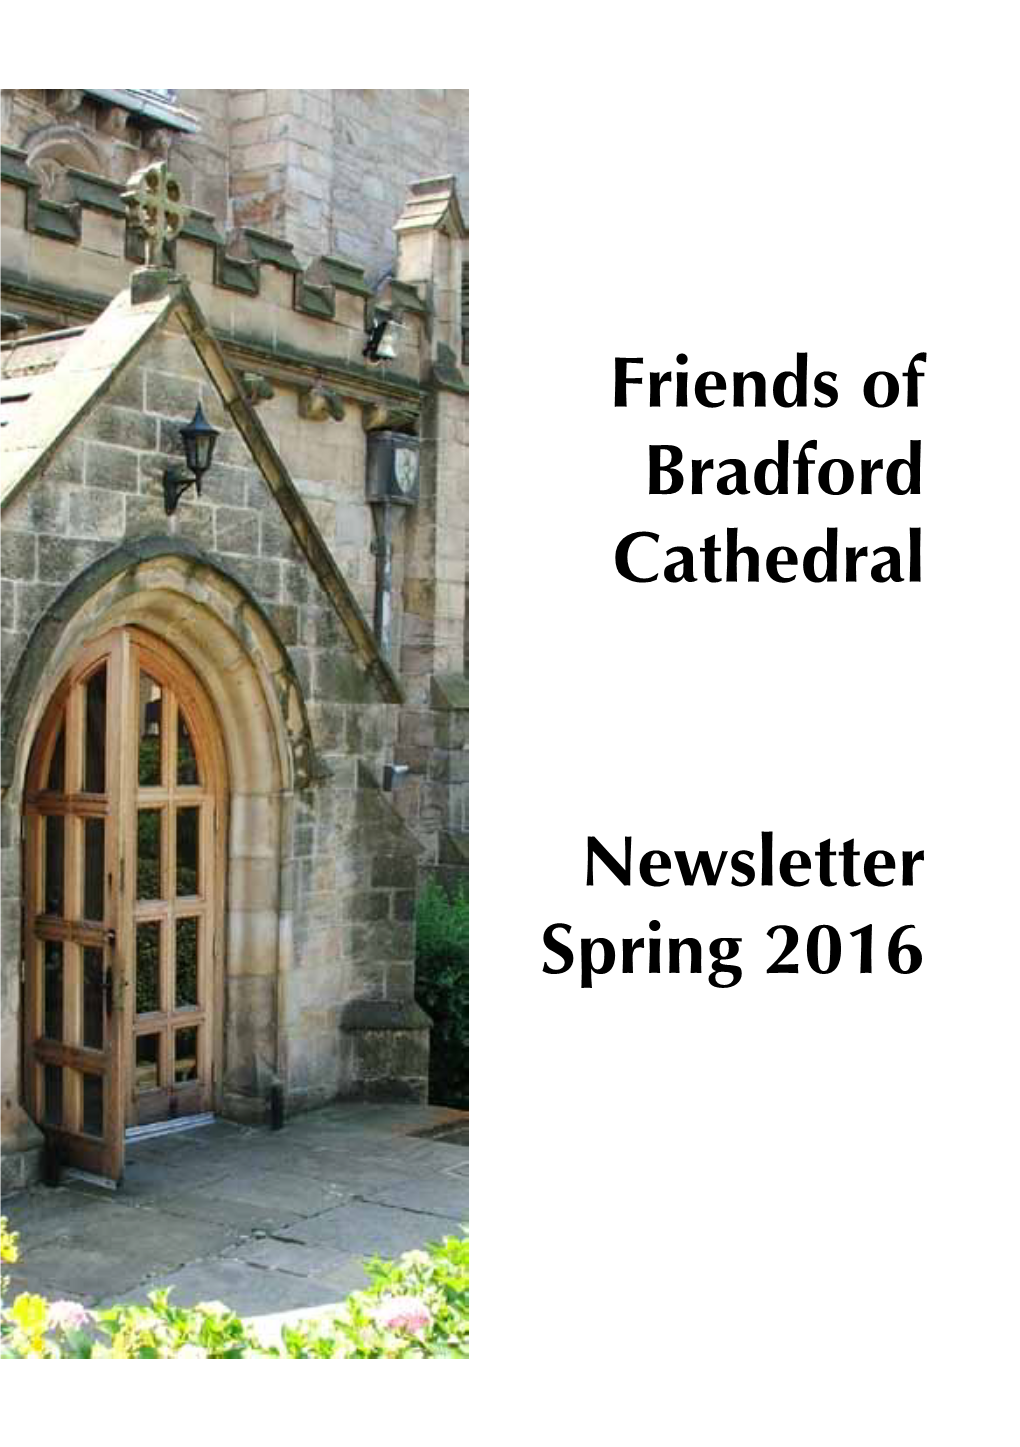 Friends of Bradford Cathedral Newsletter Spring 2016